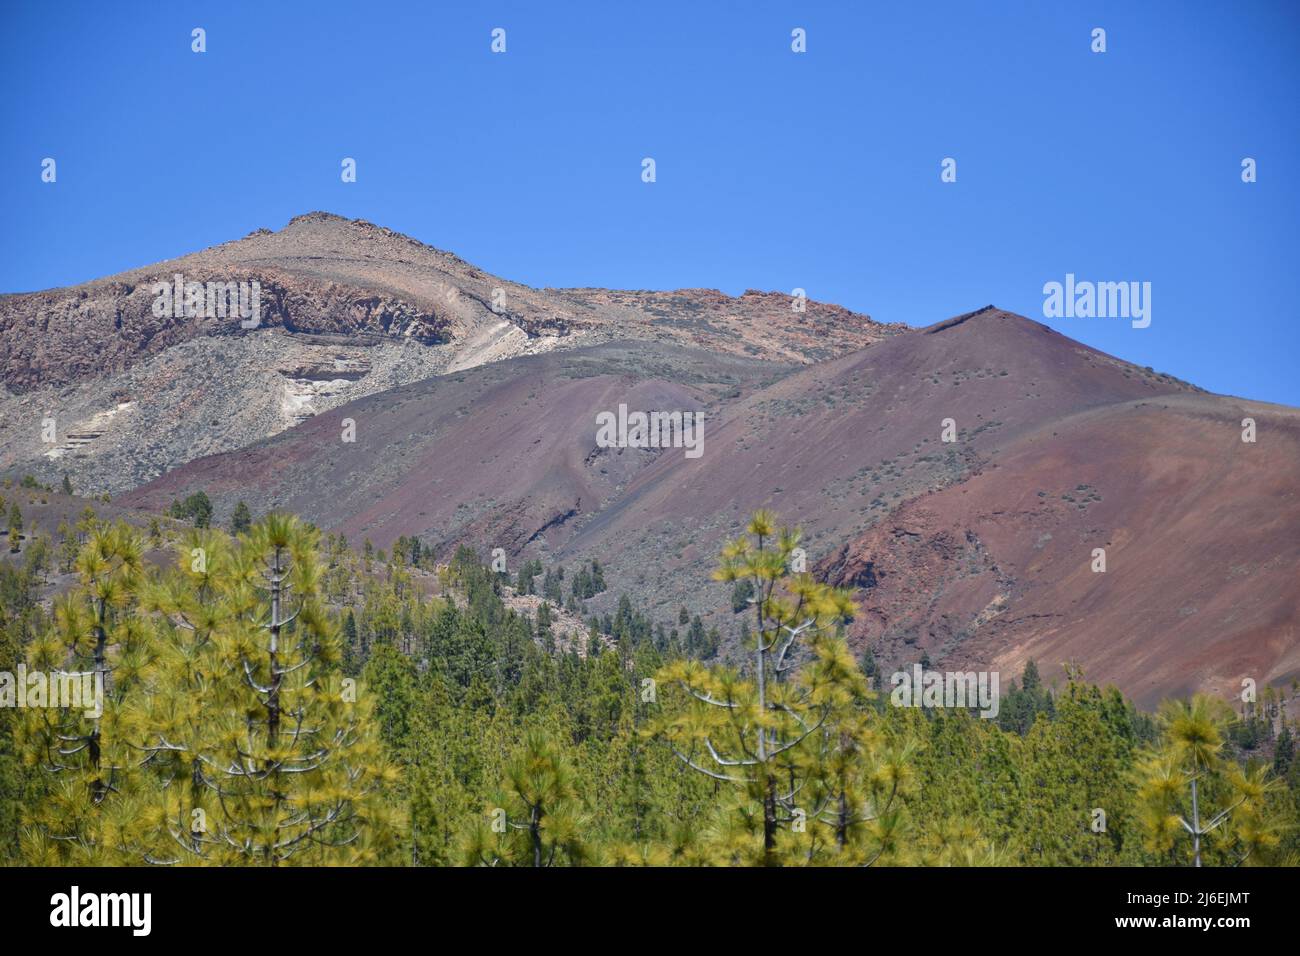 Colorful mountains of Teide National Park seen from the cloud forest of Paisaje Lunar, Tenerife island, Spain Stock Photo